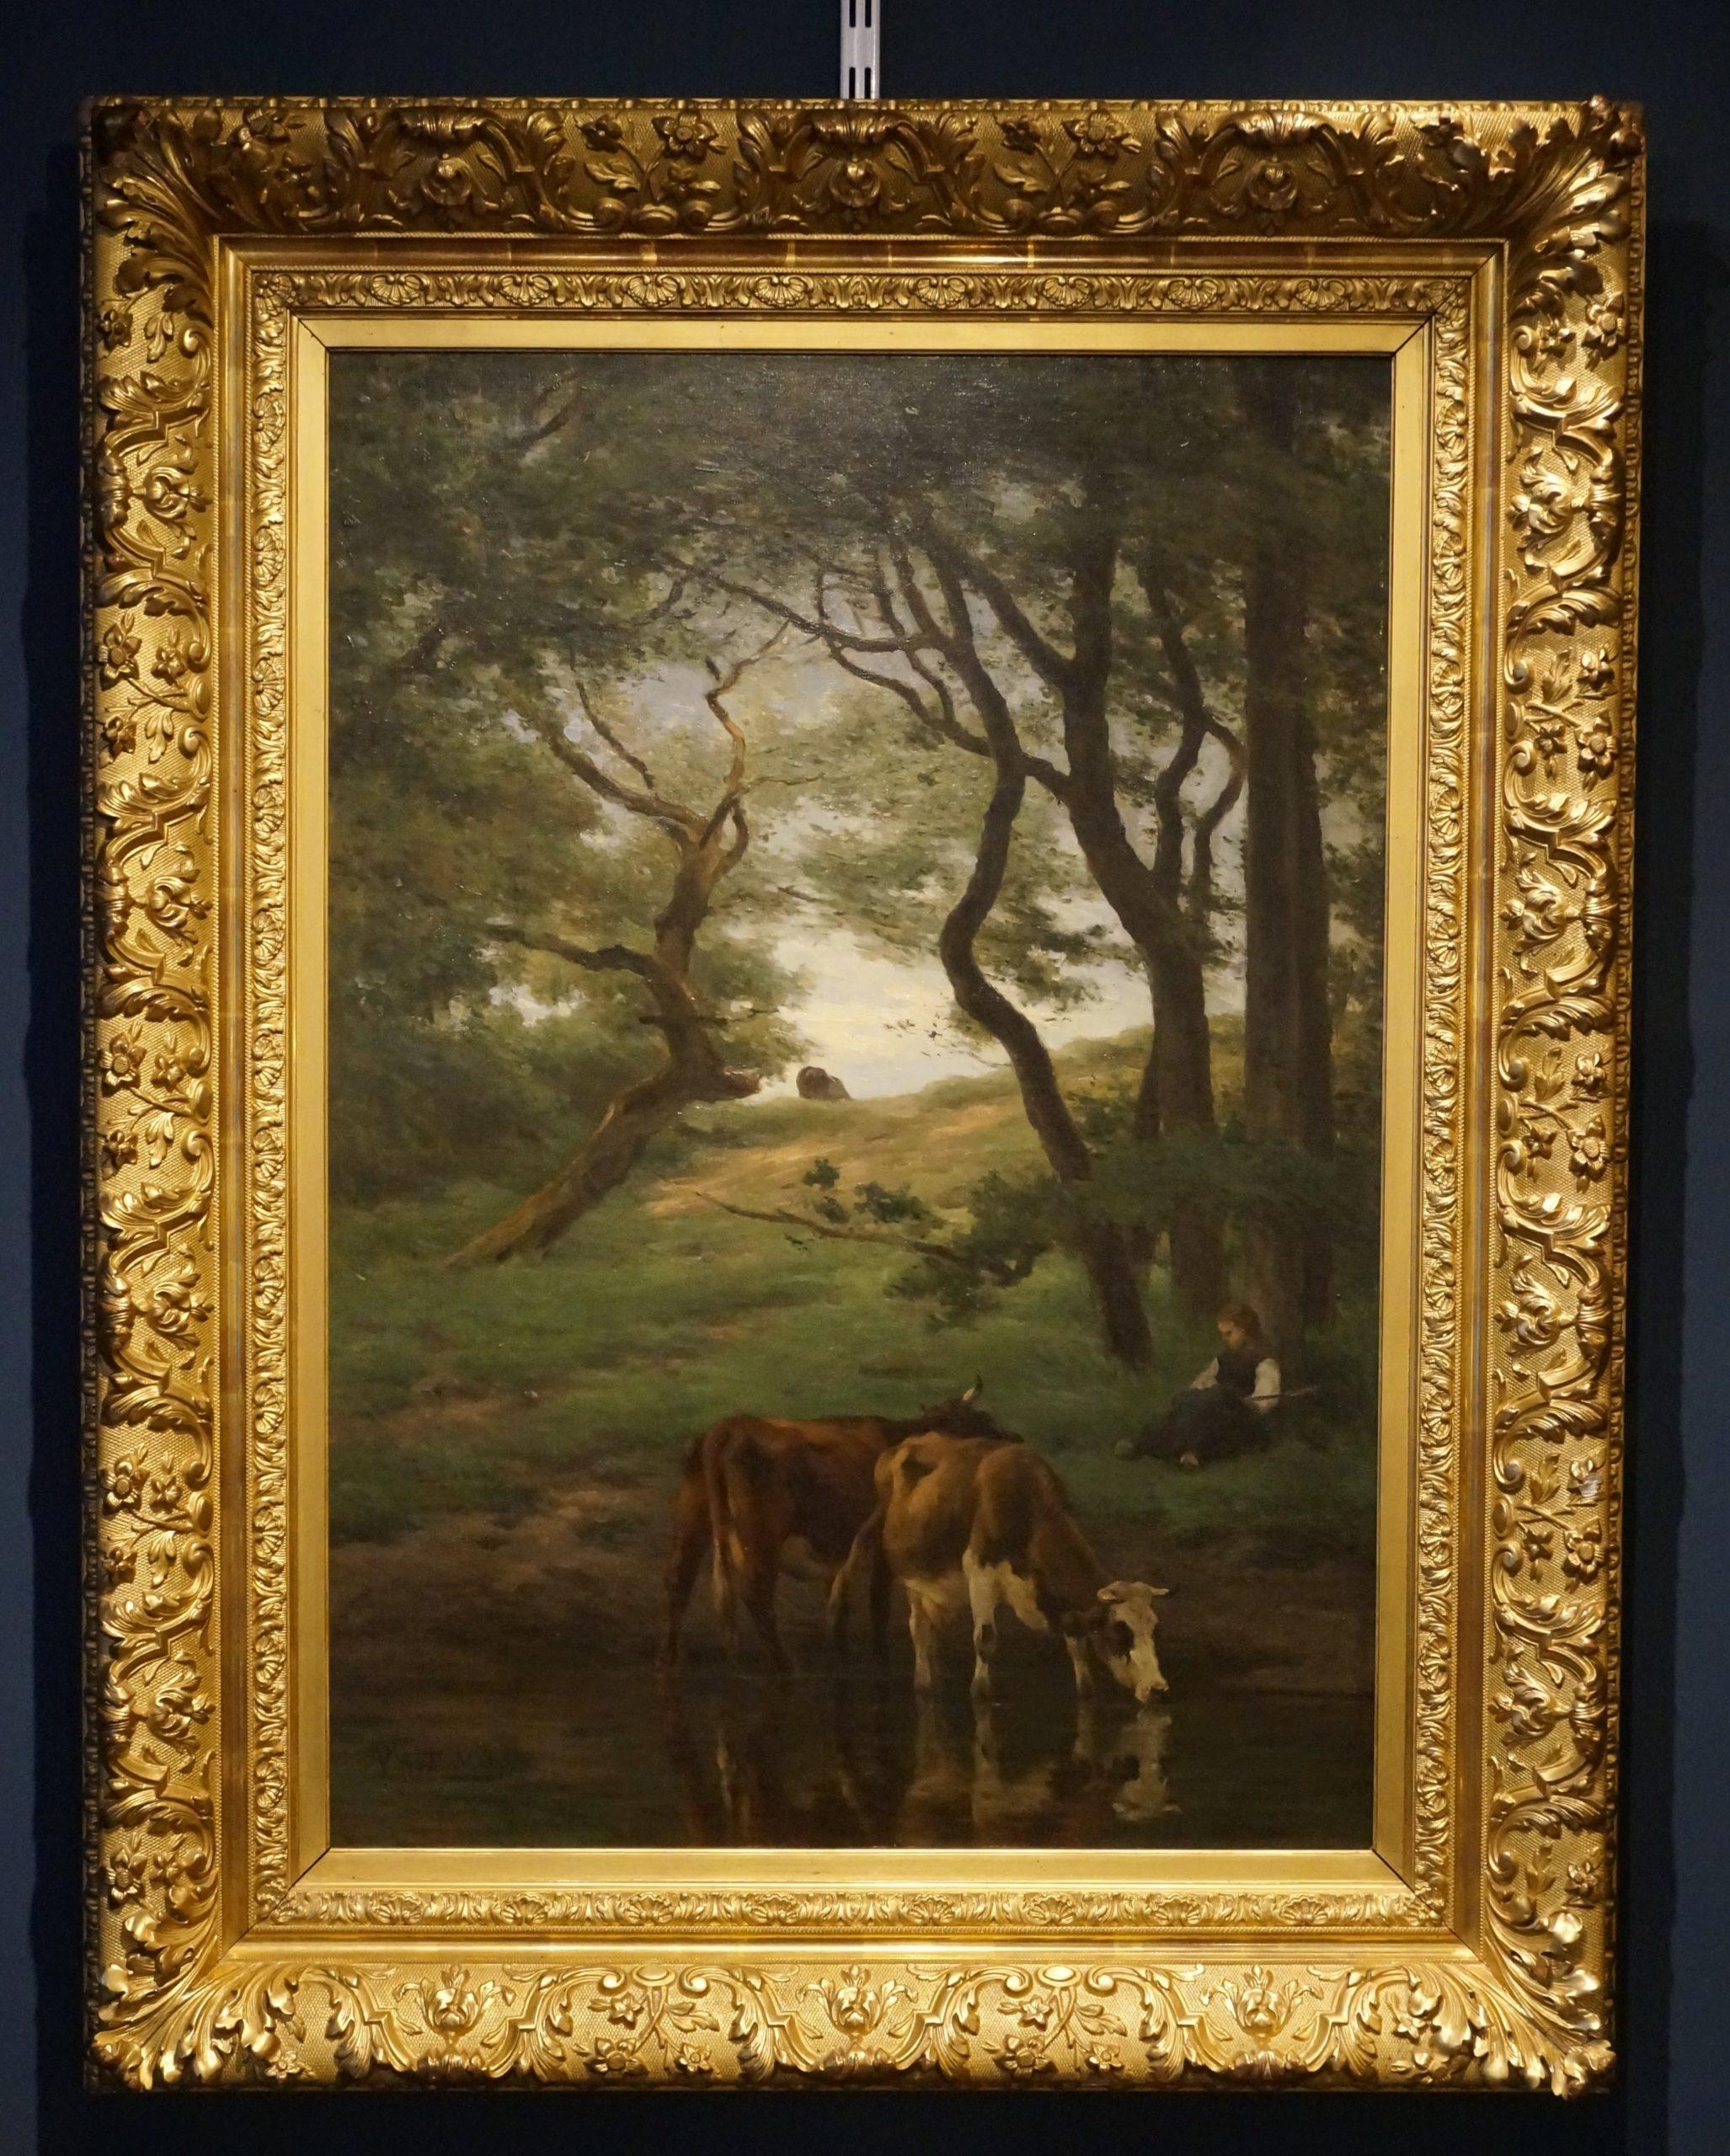 Cows in landscape - Painting by Pieter Stortenbeker